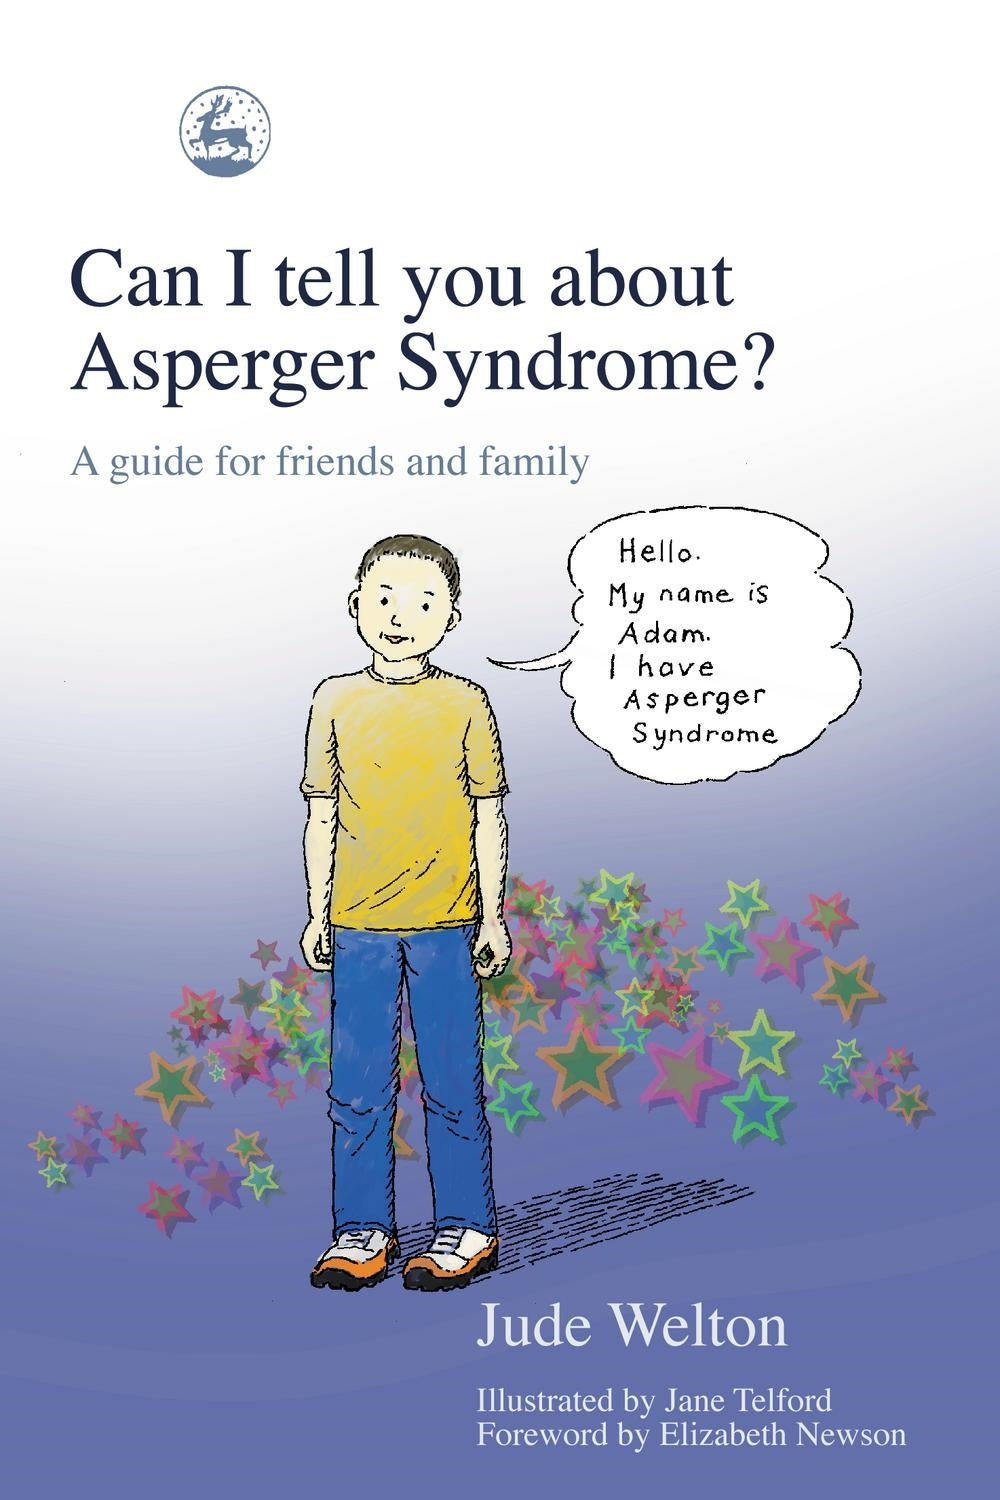 Can I tell you about Asperger Syndrome? by Jane Telford, Elizabeth Newson, Jude Welton